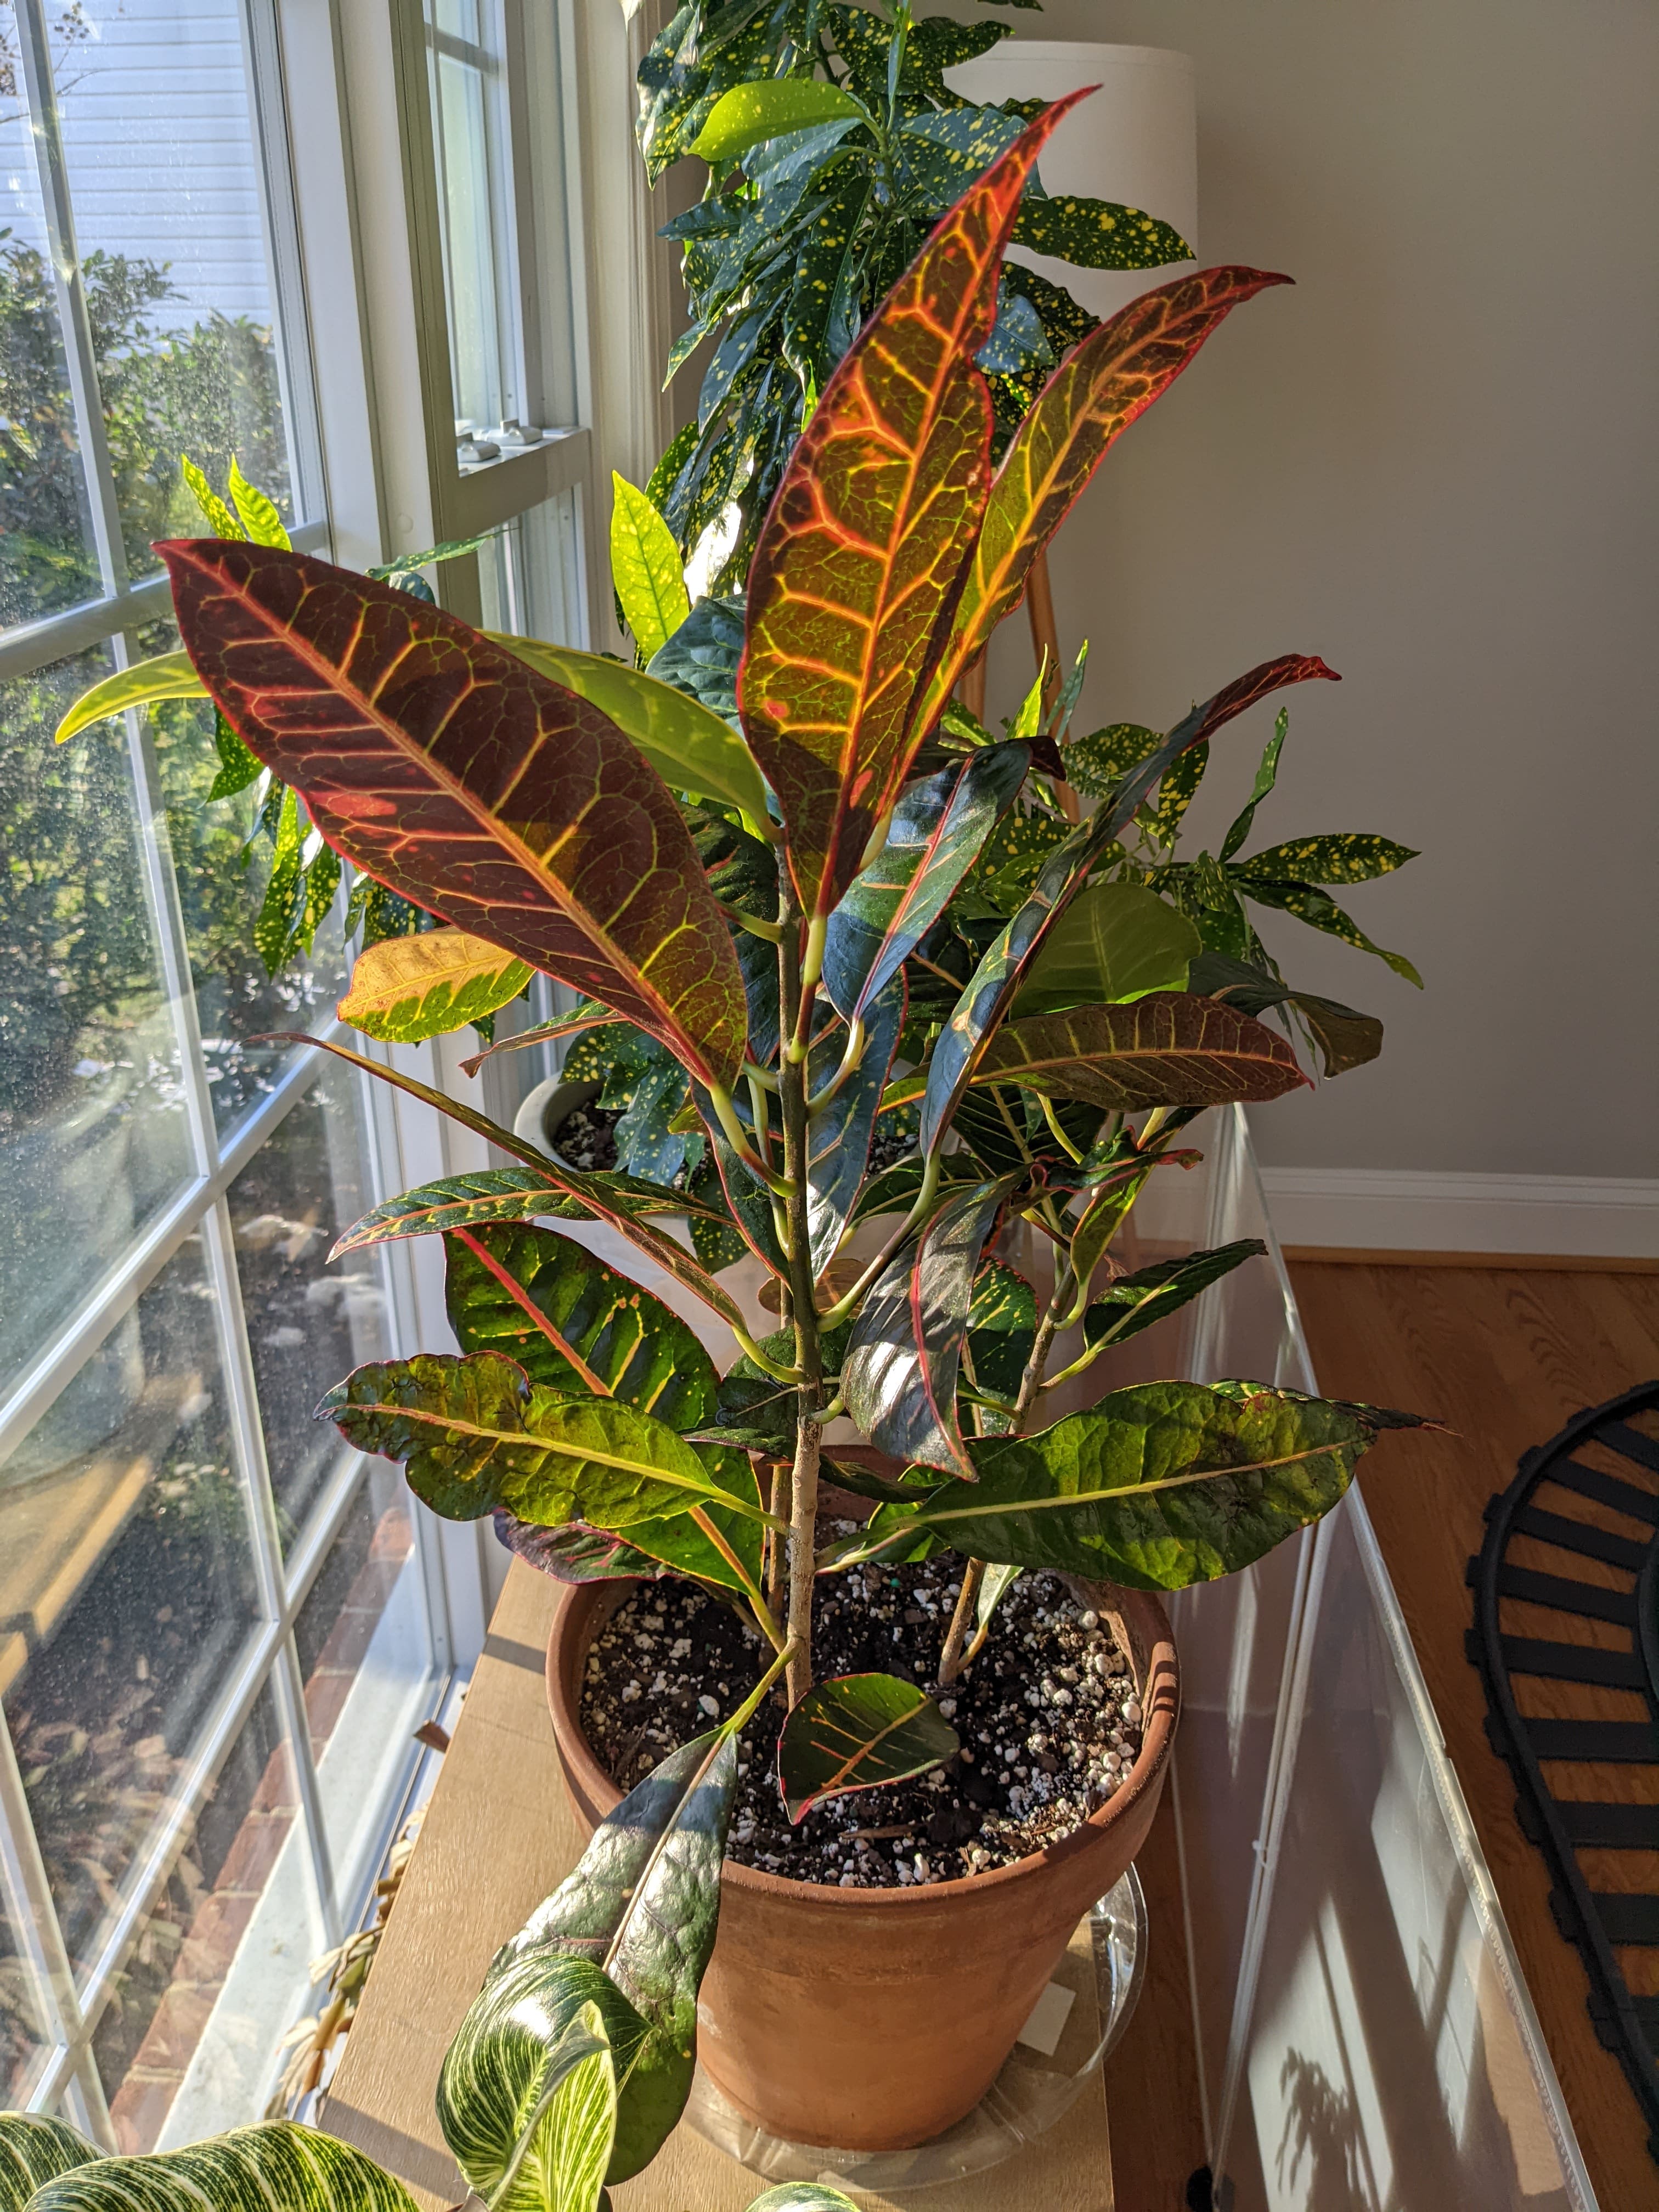 How to Fix Croton Petra Leaves Drooping